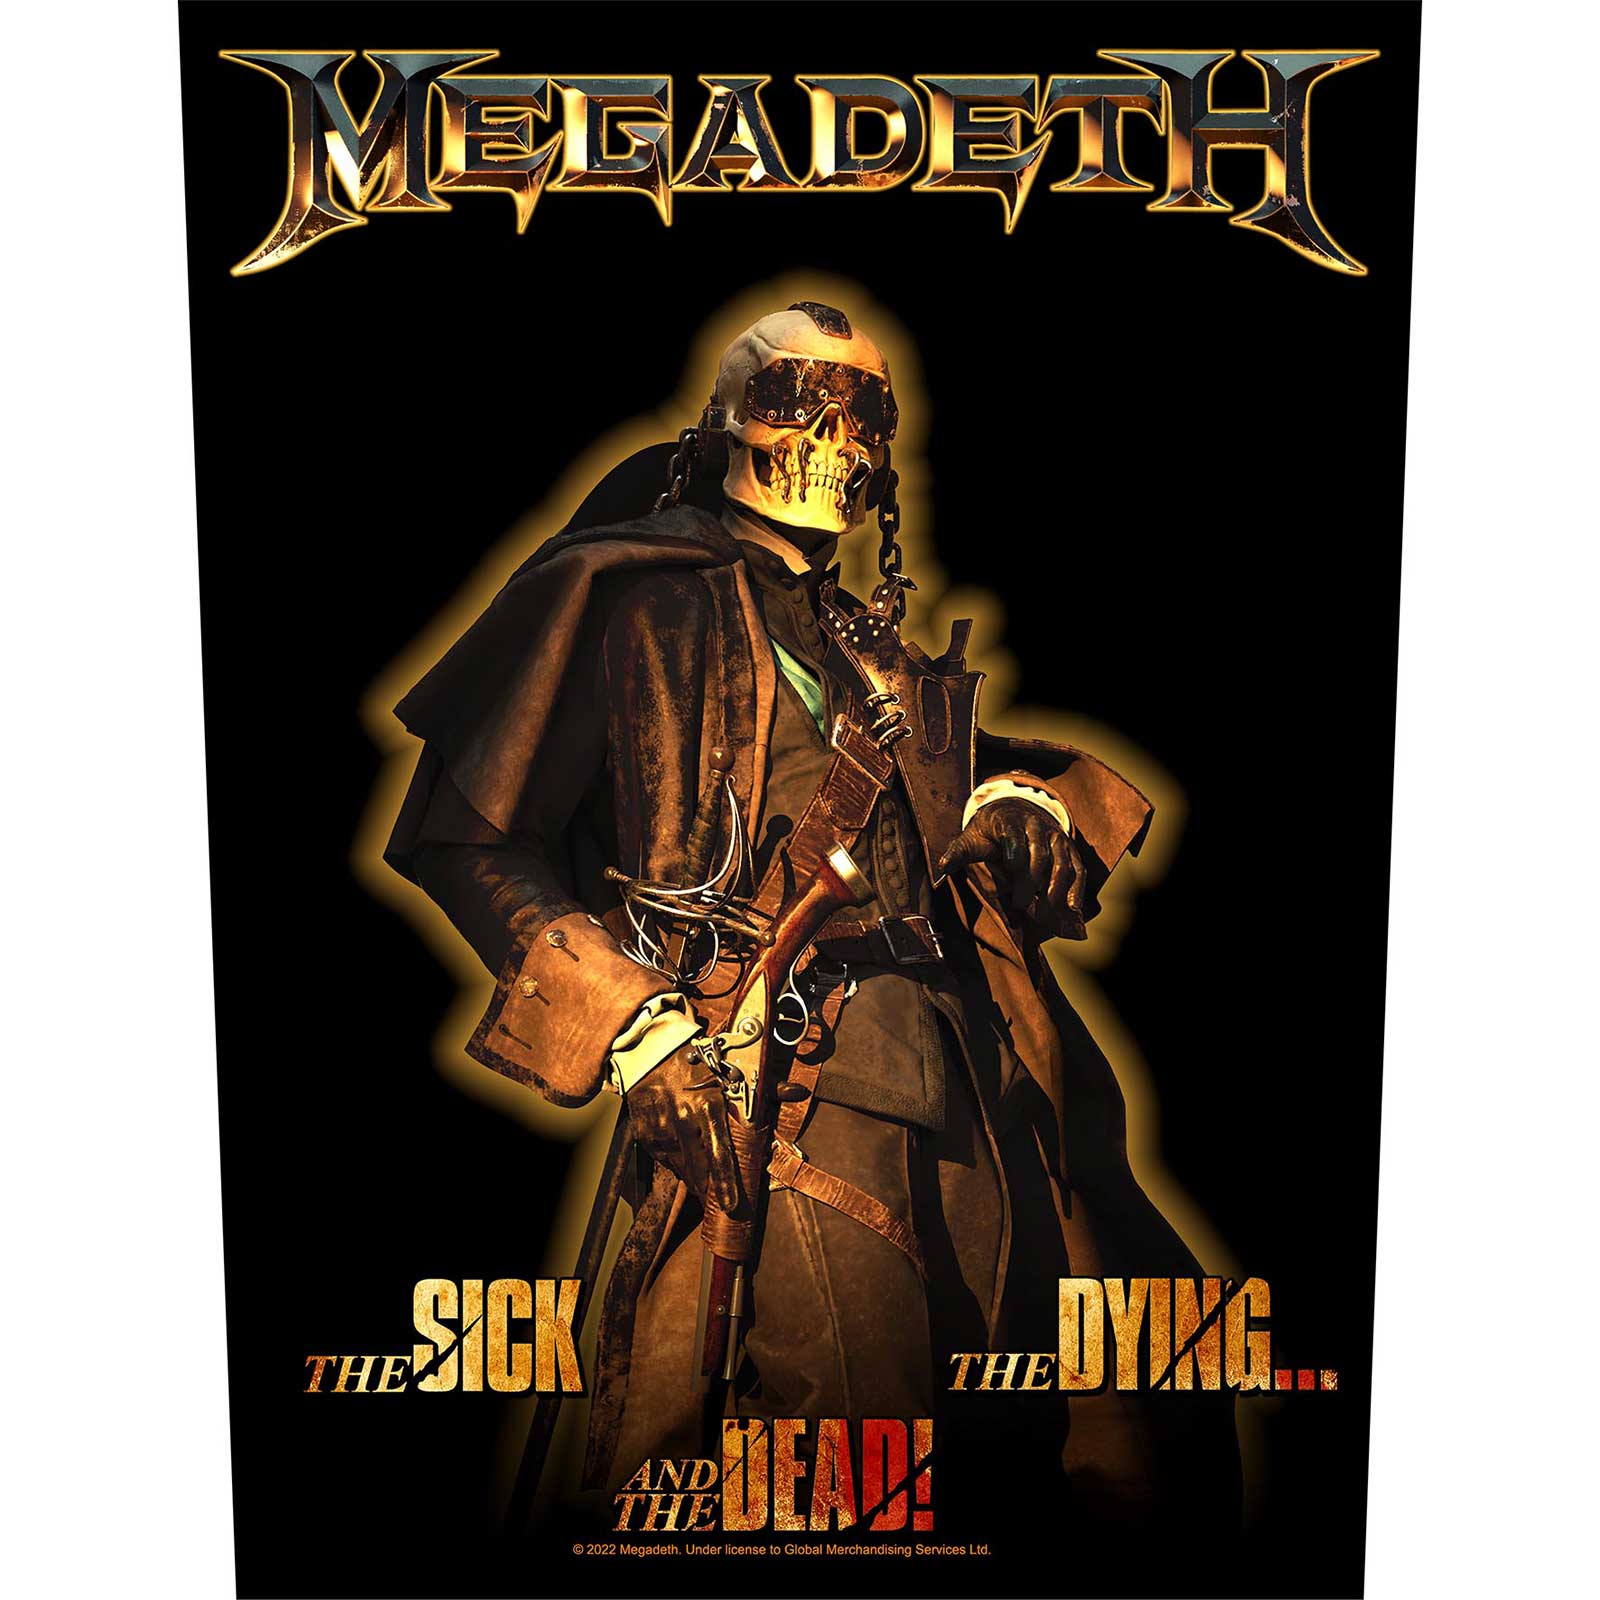 MEGADETH / THE SICK, THE DYING c AND THE DEAD (BP)